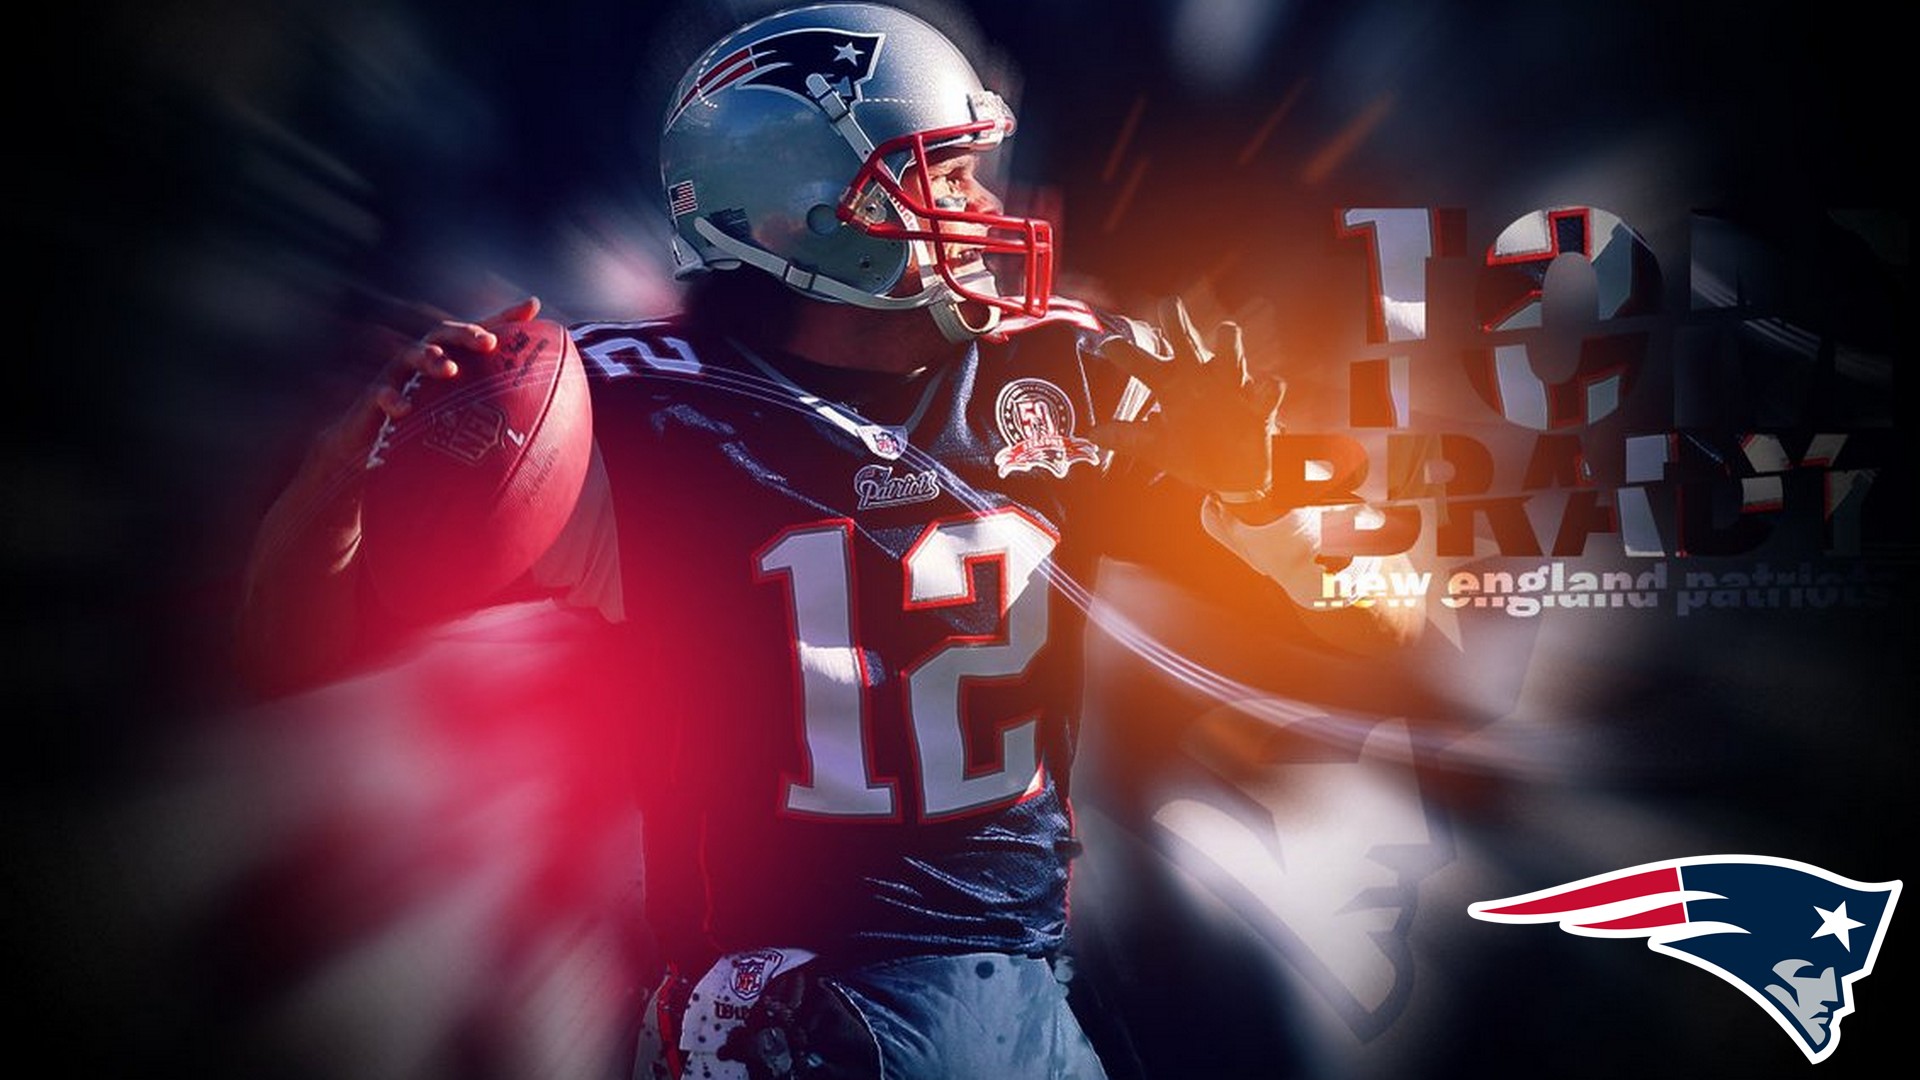 HD Tom Brady Super Bowl Backgrounds With Resolution 1920X1080 pixel. You can make this wallpaper for your Mac or Windows Desktop Background, iPhone, Android or Tablet and another Smartphone device for free